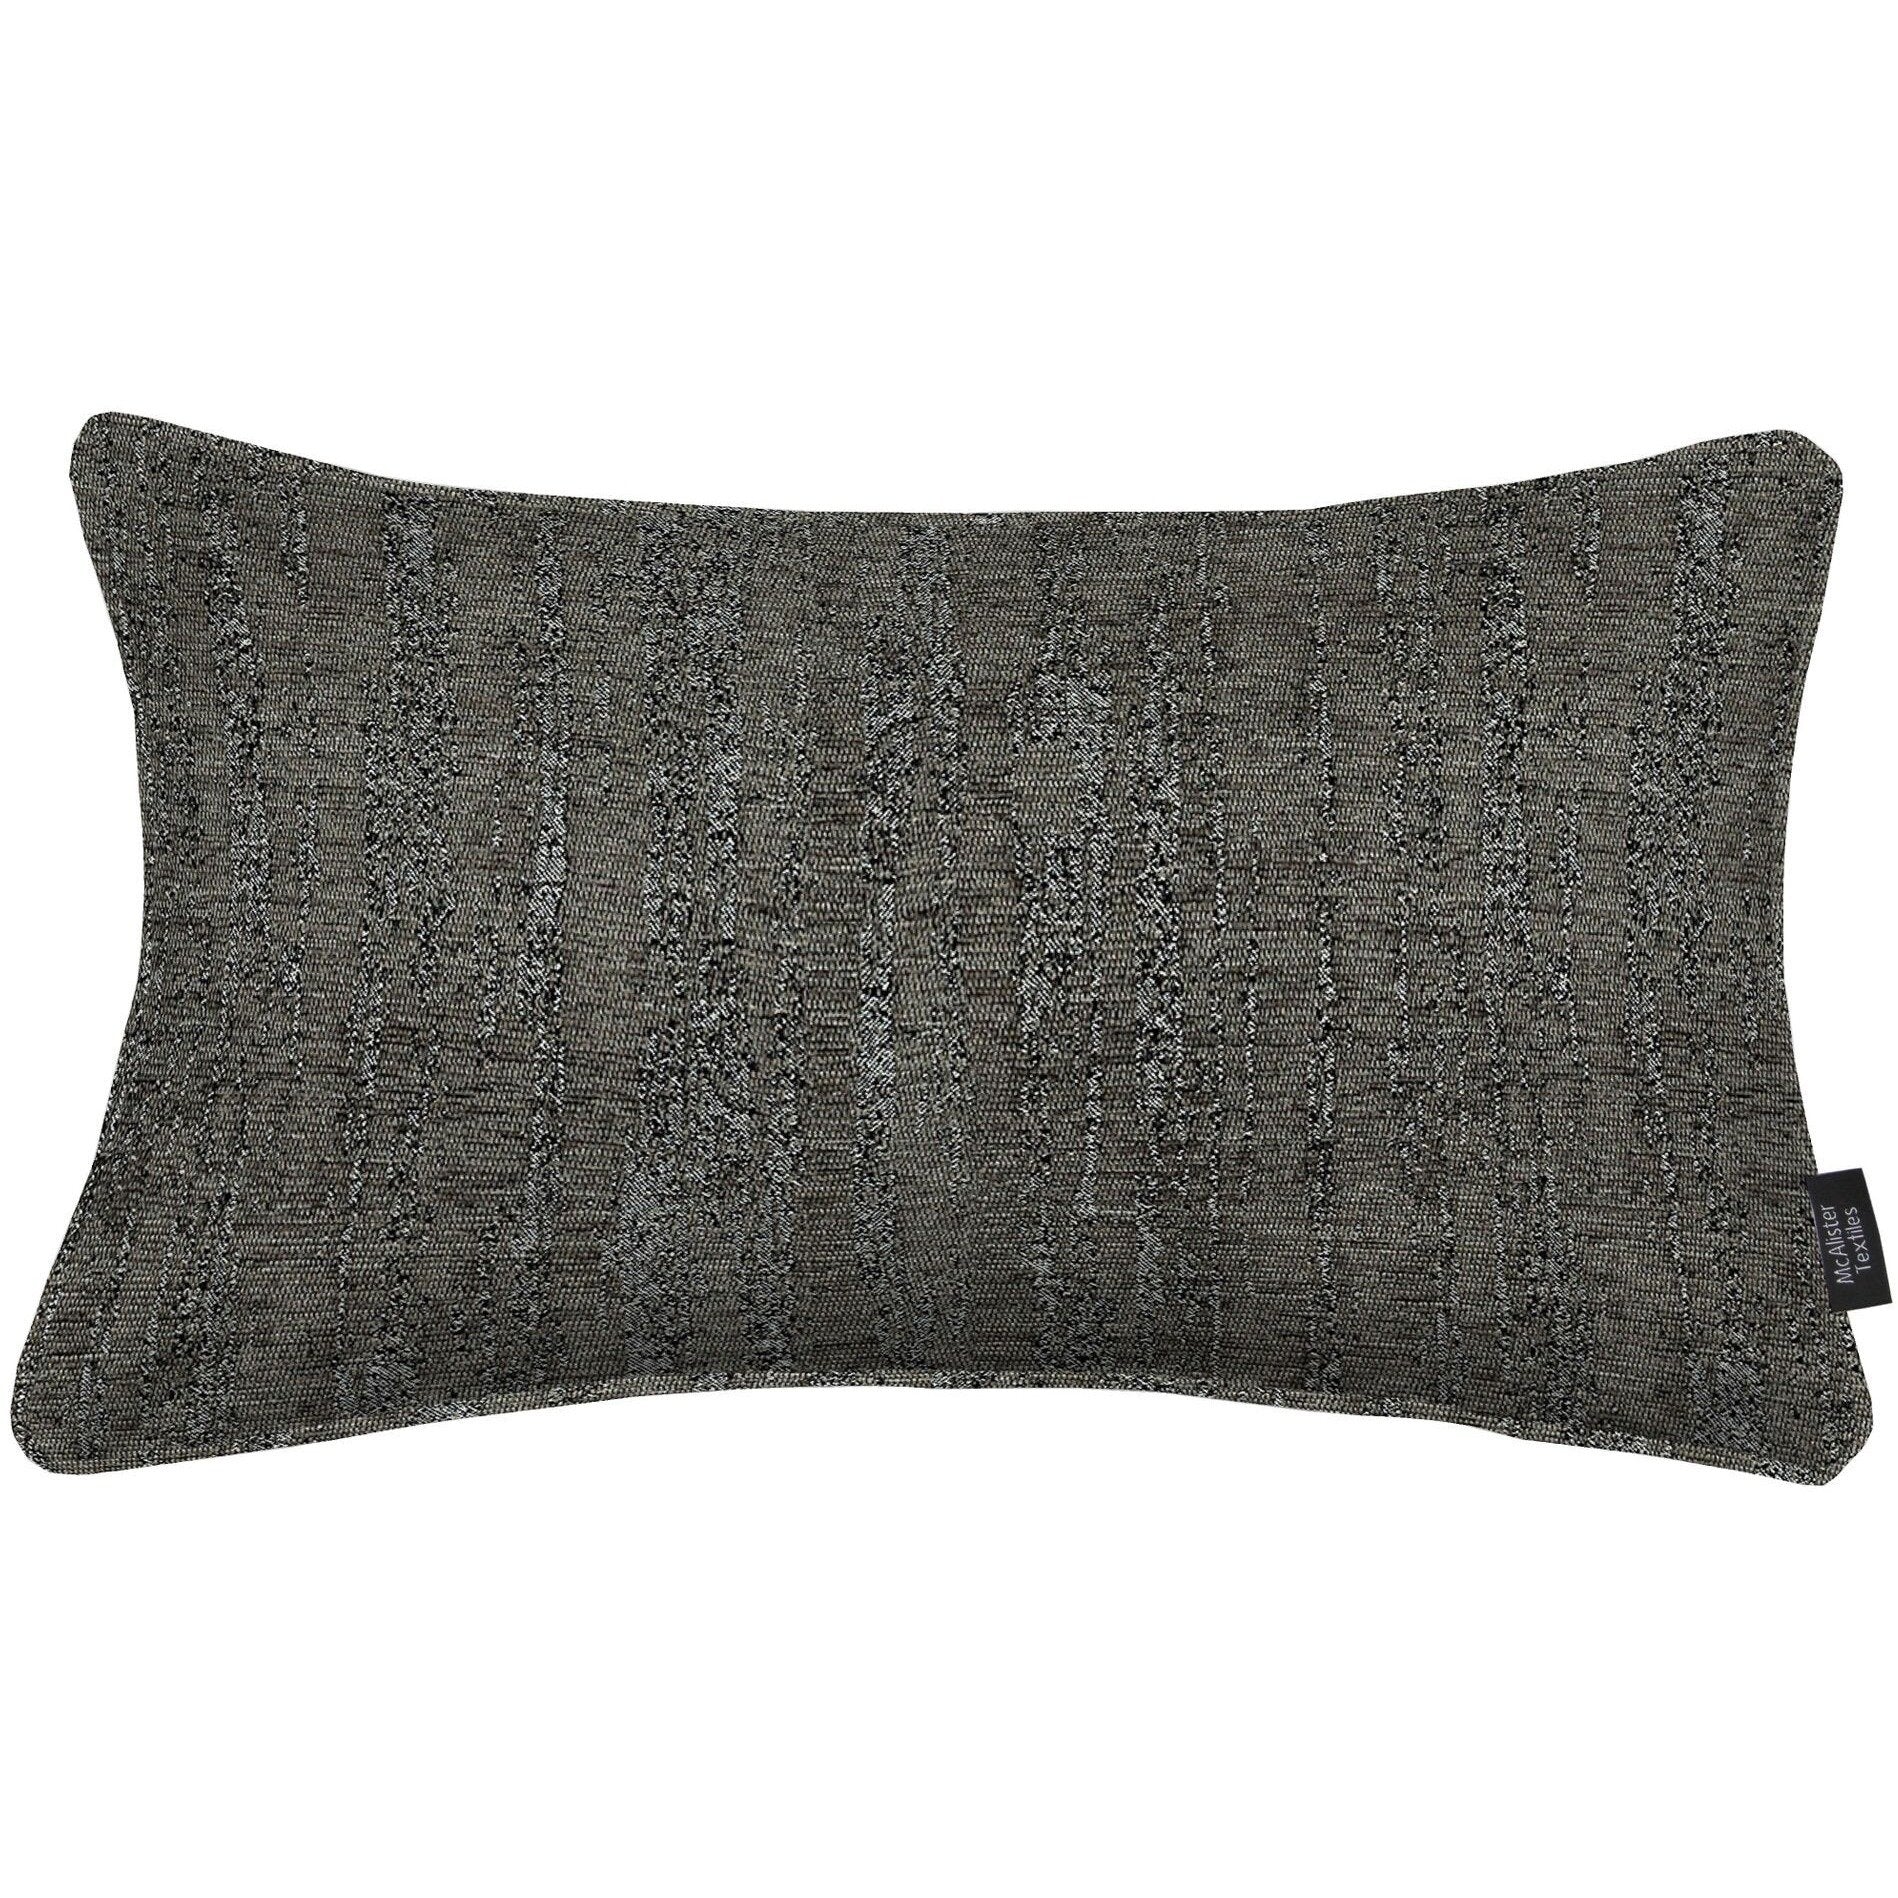 McAlister Textiles Textured Chenille Charcoal Grey Cushion Cushions and Covers Cover Only 50cm x 30cm 